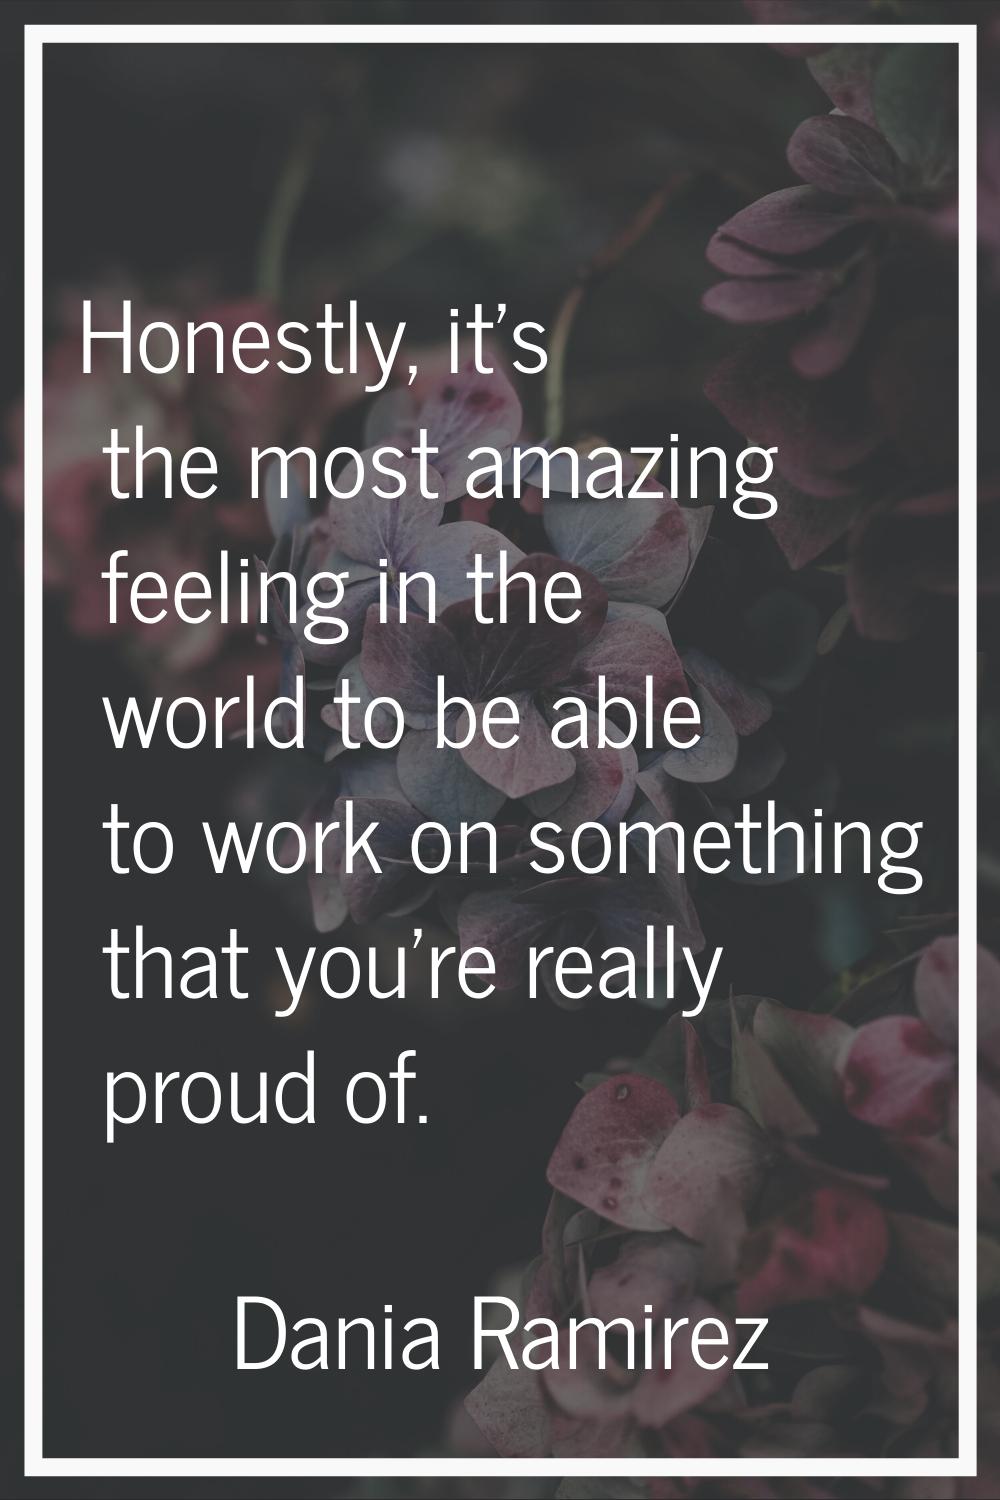 Honestly, it's the most amazing feeling in the world to be able to work on something that you're re